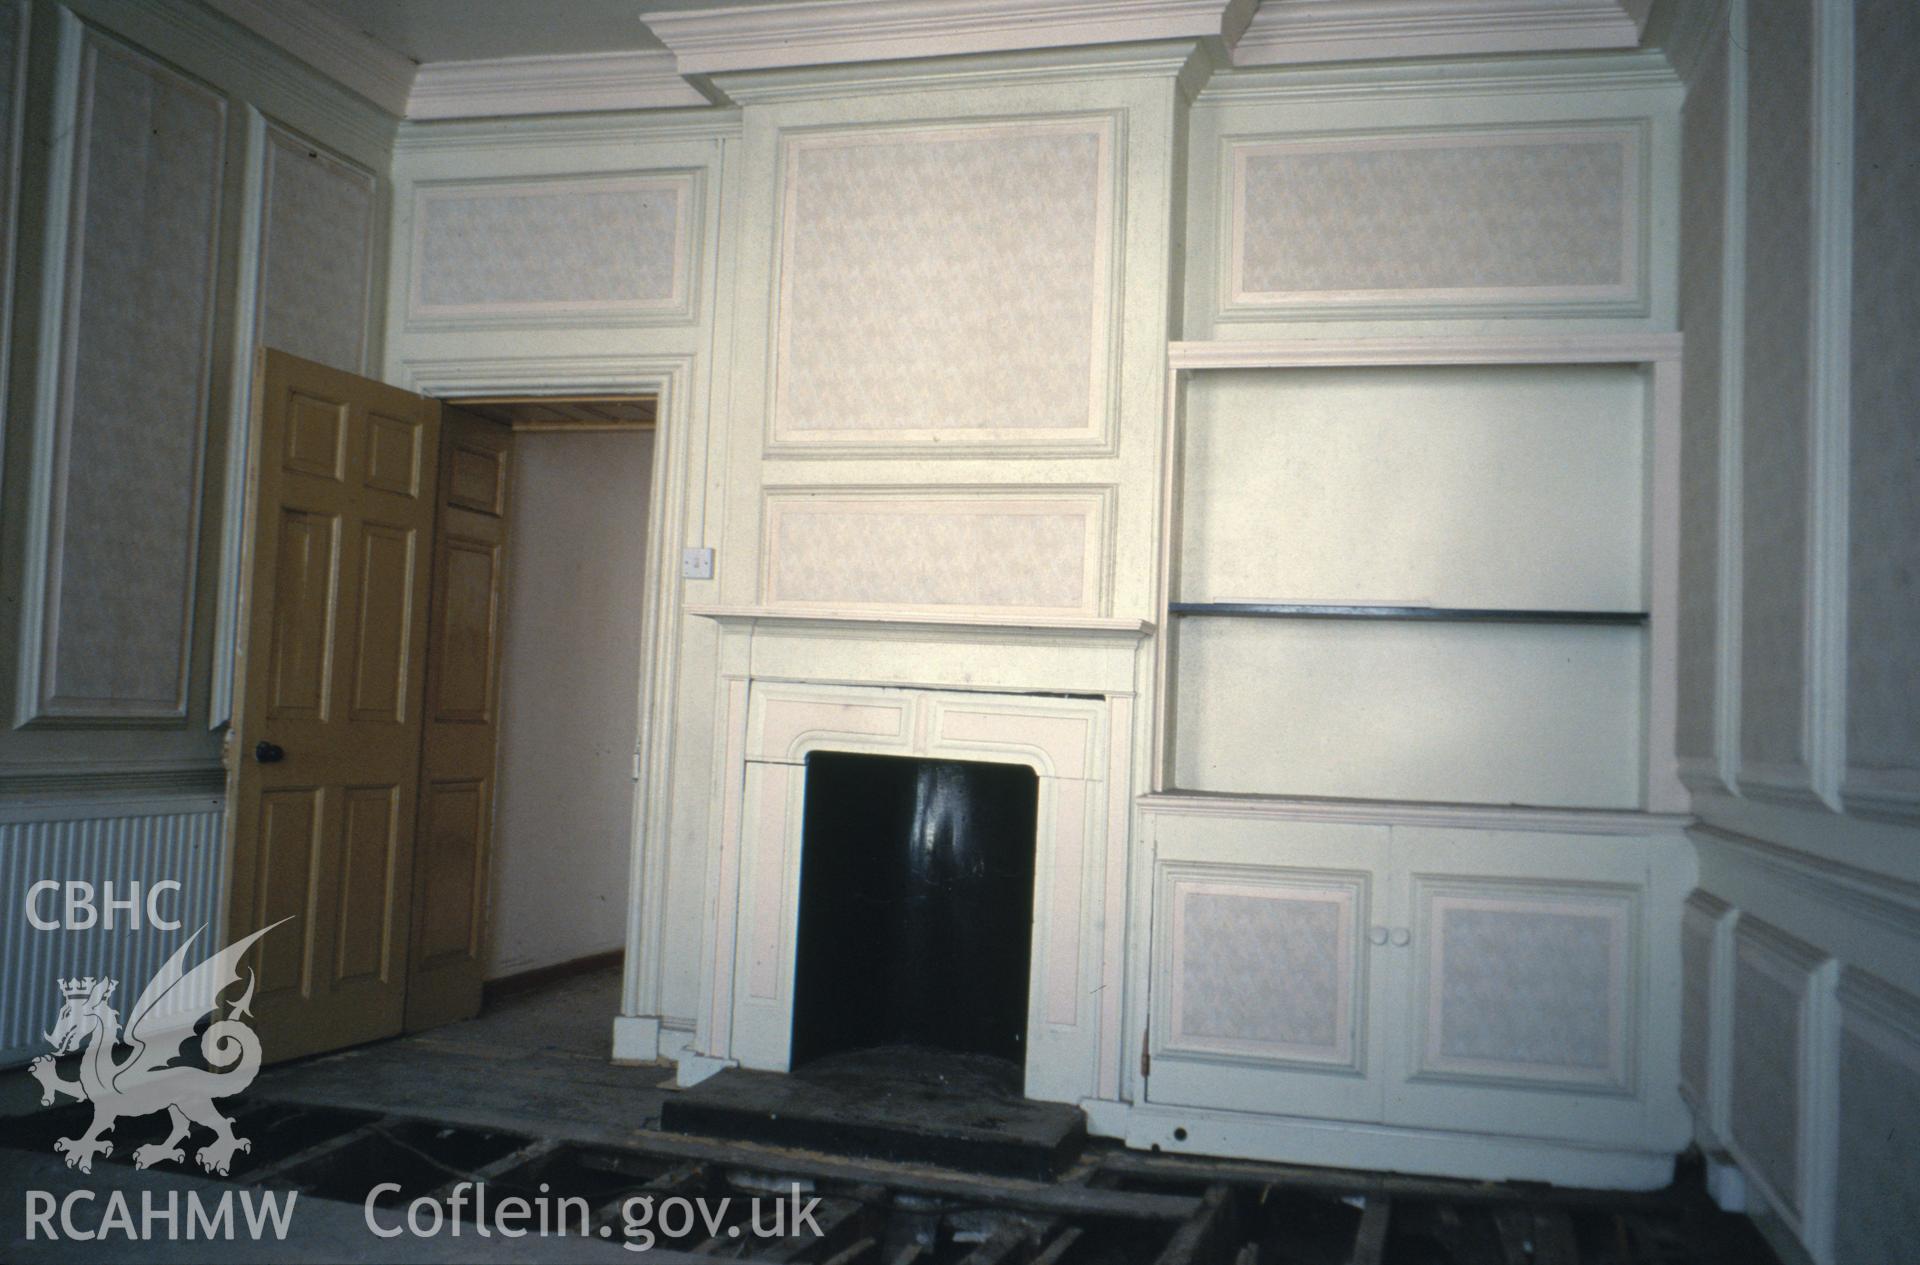 Interior view showing first floor front panelled room.